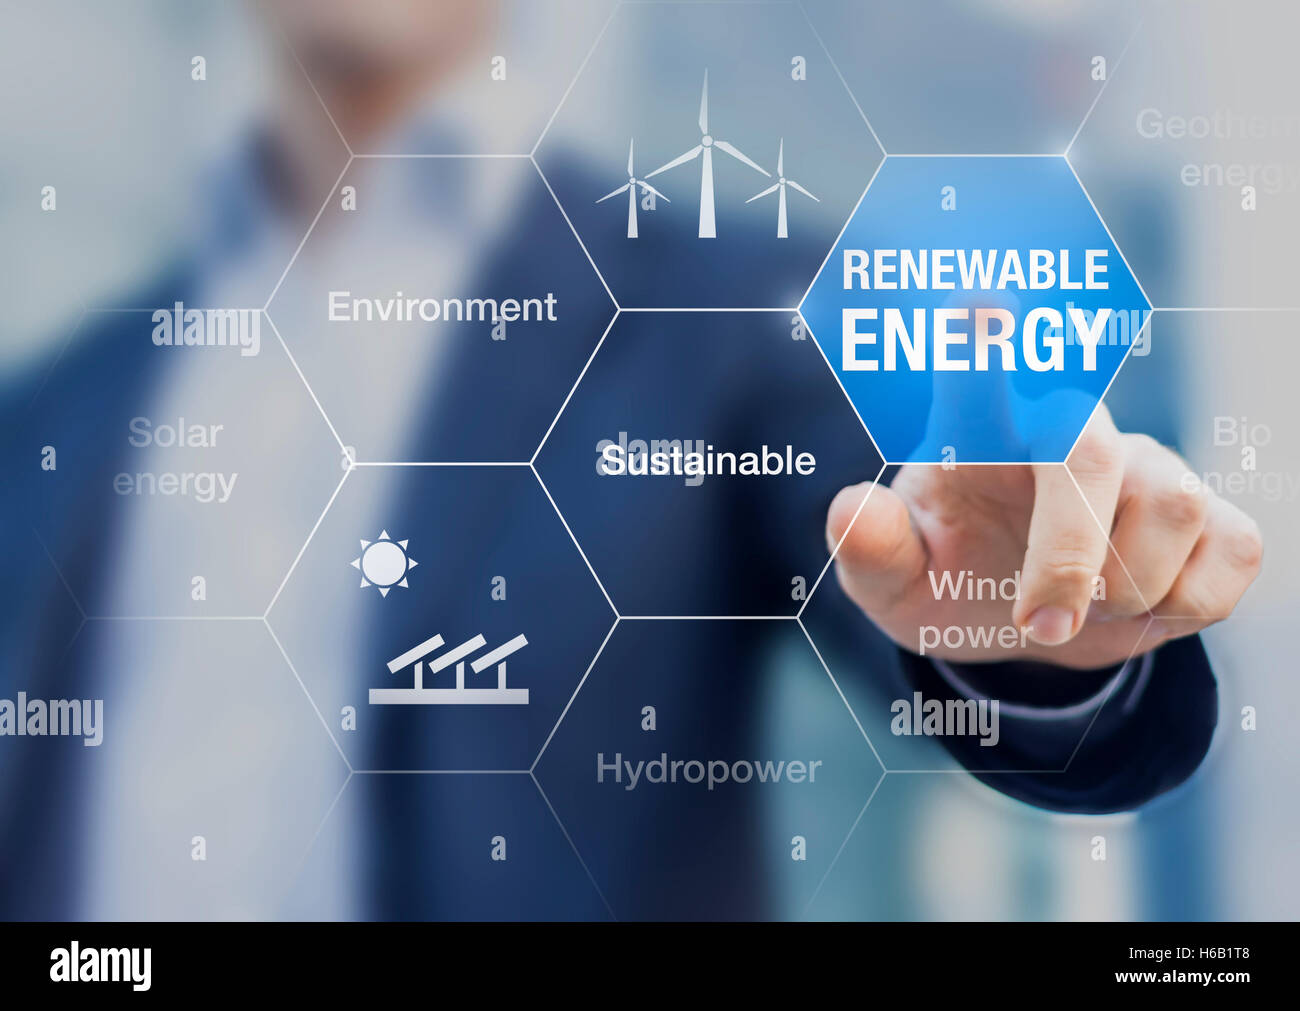 Renewable energy presentation about sustainable development, wind power, photovoltaic and hydropower with businessman Stock Photo